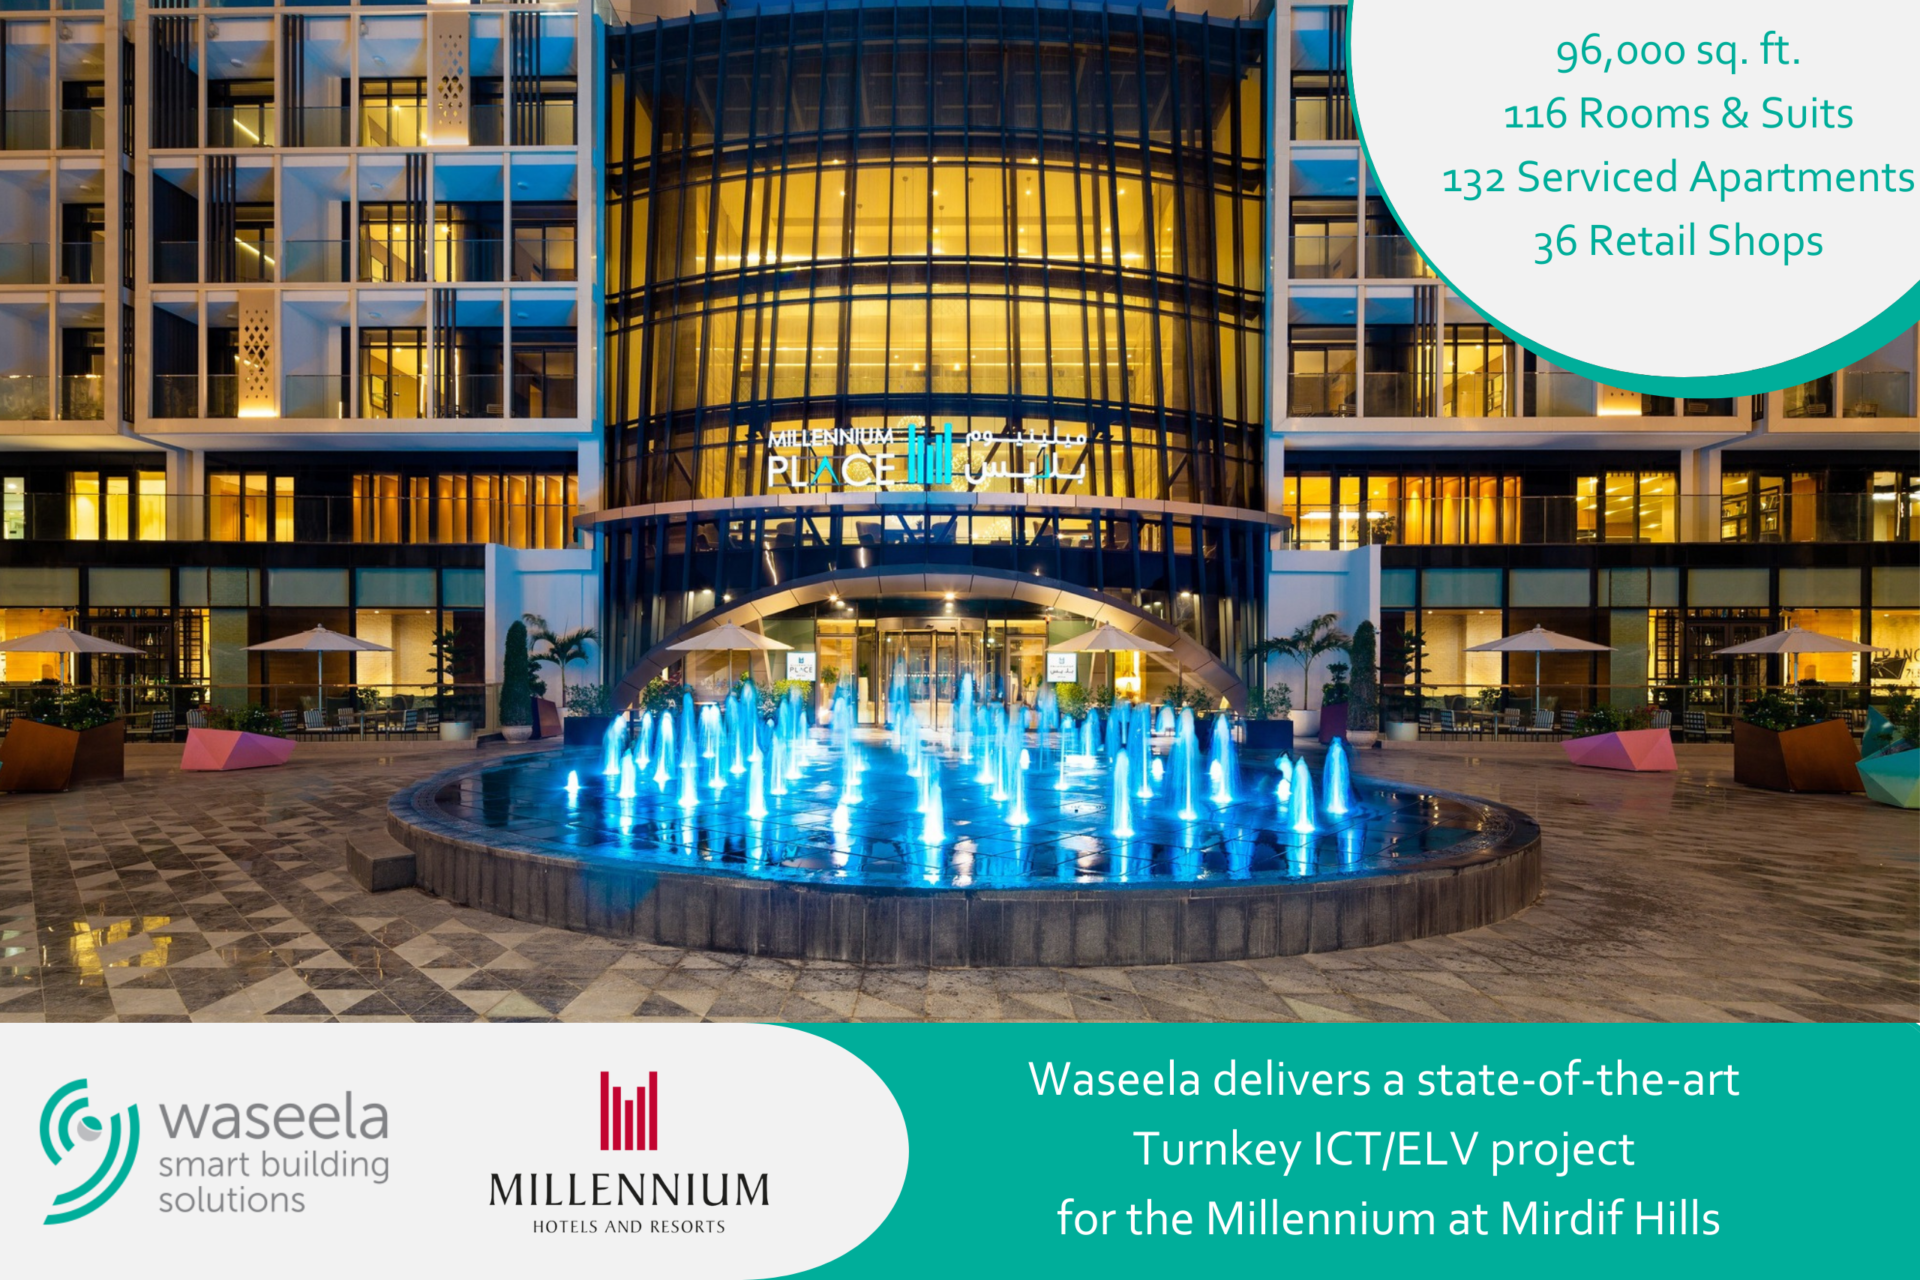 Waseela delivers a state-of-the-art Turnkey 96,000 Sq. ft. ICT/ELV project for Millennium at Mirdif Hills, Dubai, UAE